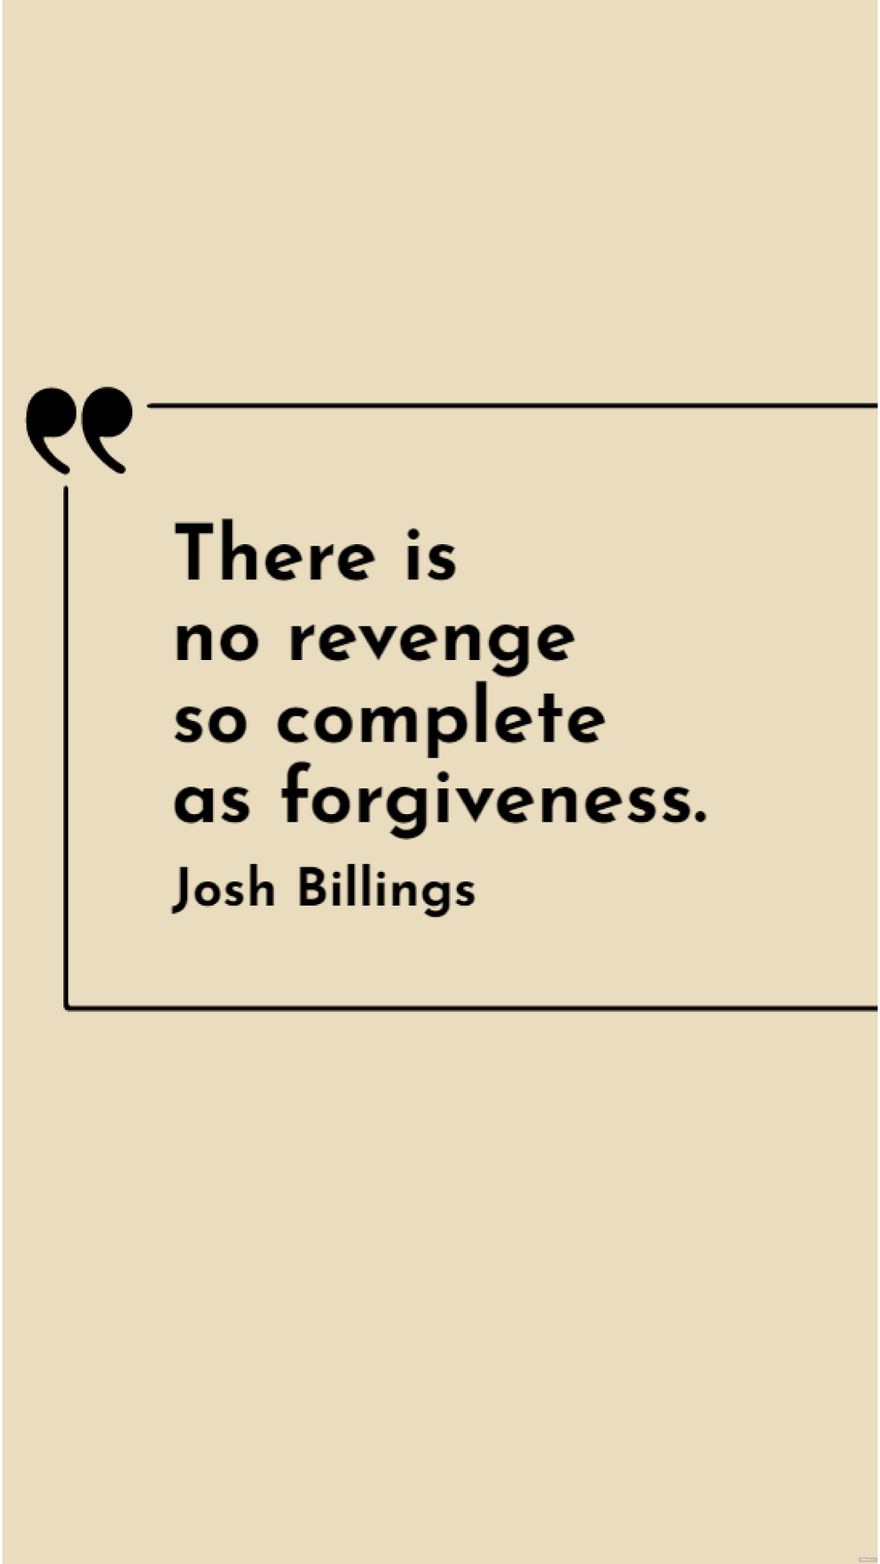 Free Josh Billings - There is no revenge so complete as forgiveness. in JPG